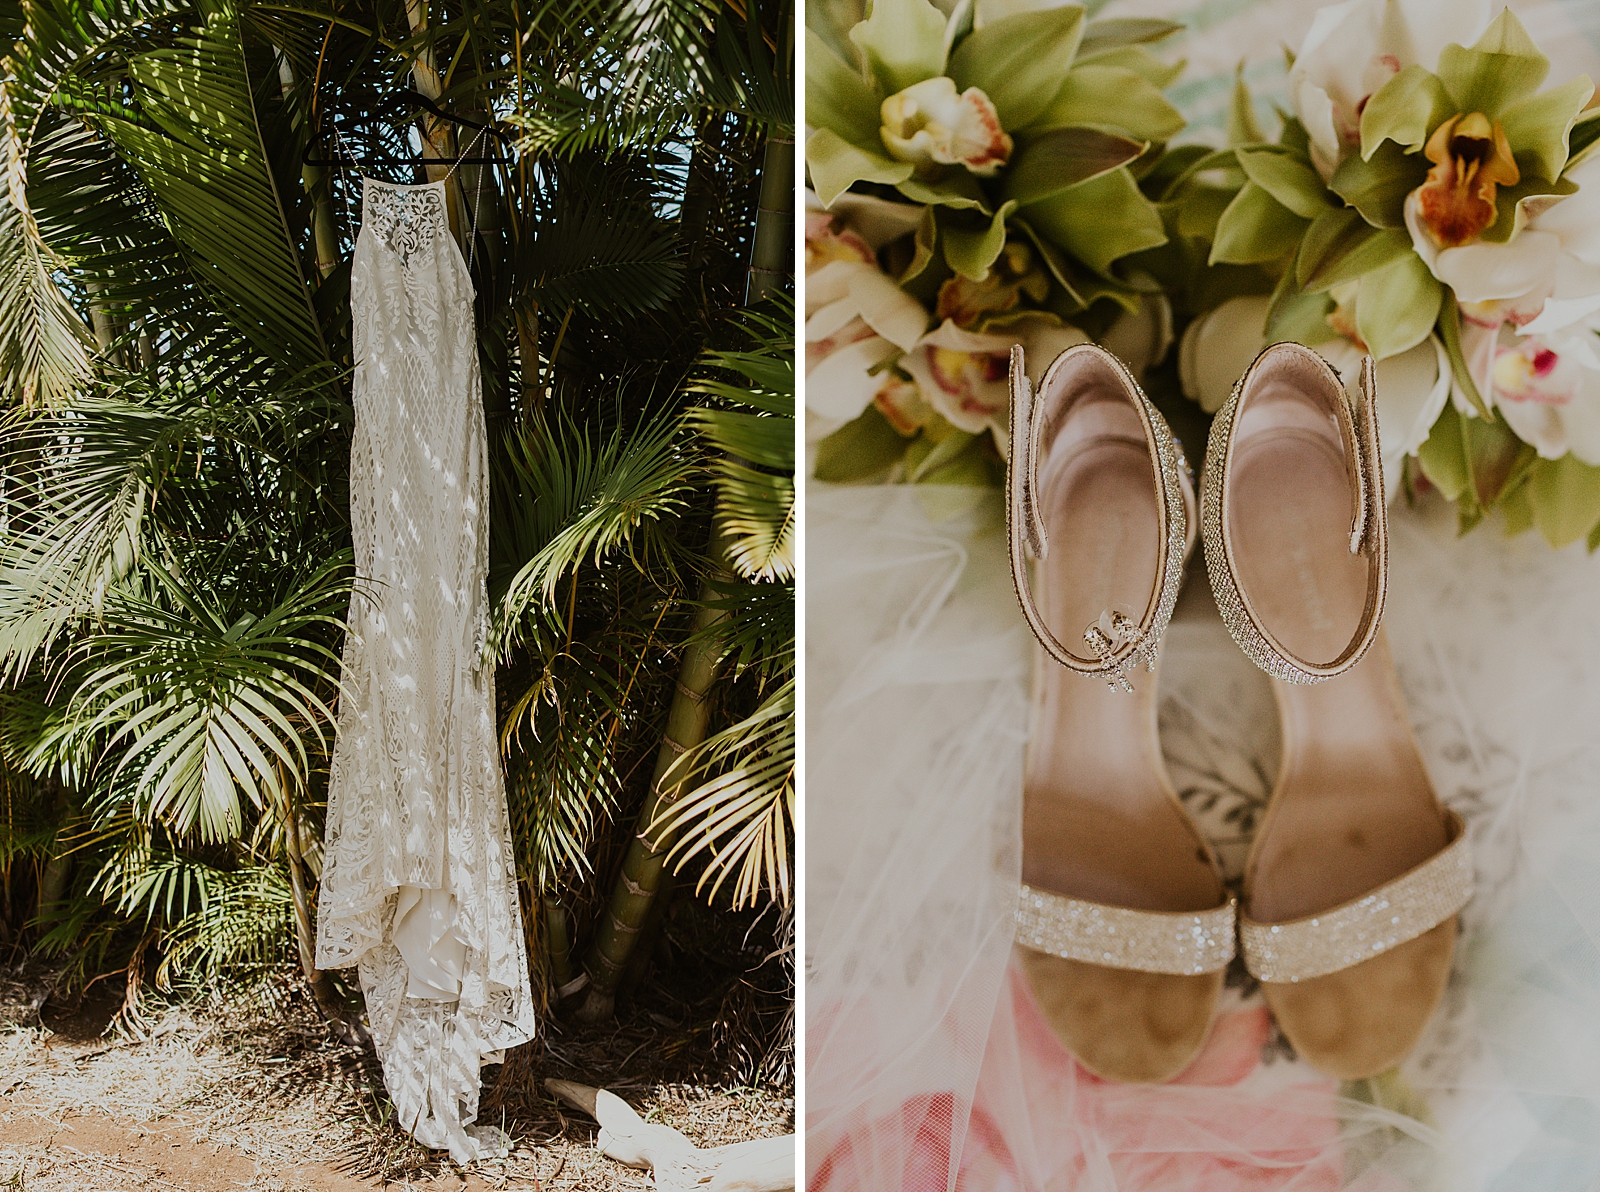 Wedding dress hanging on green plants and wedding shoes 